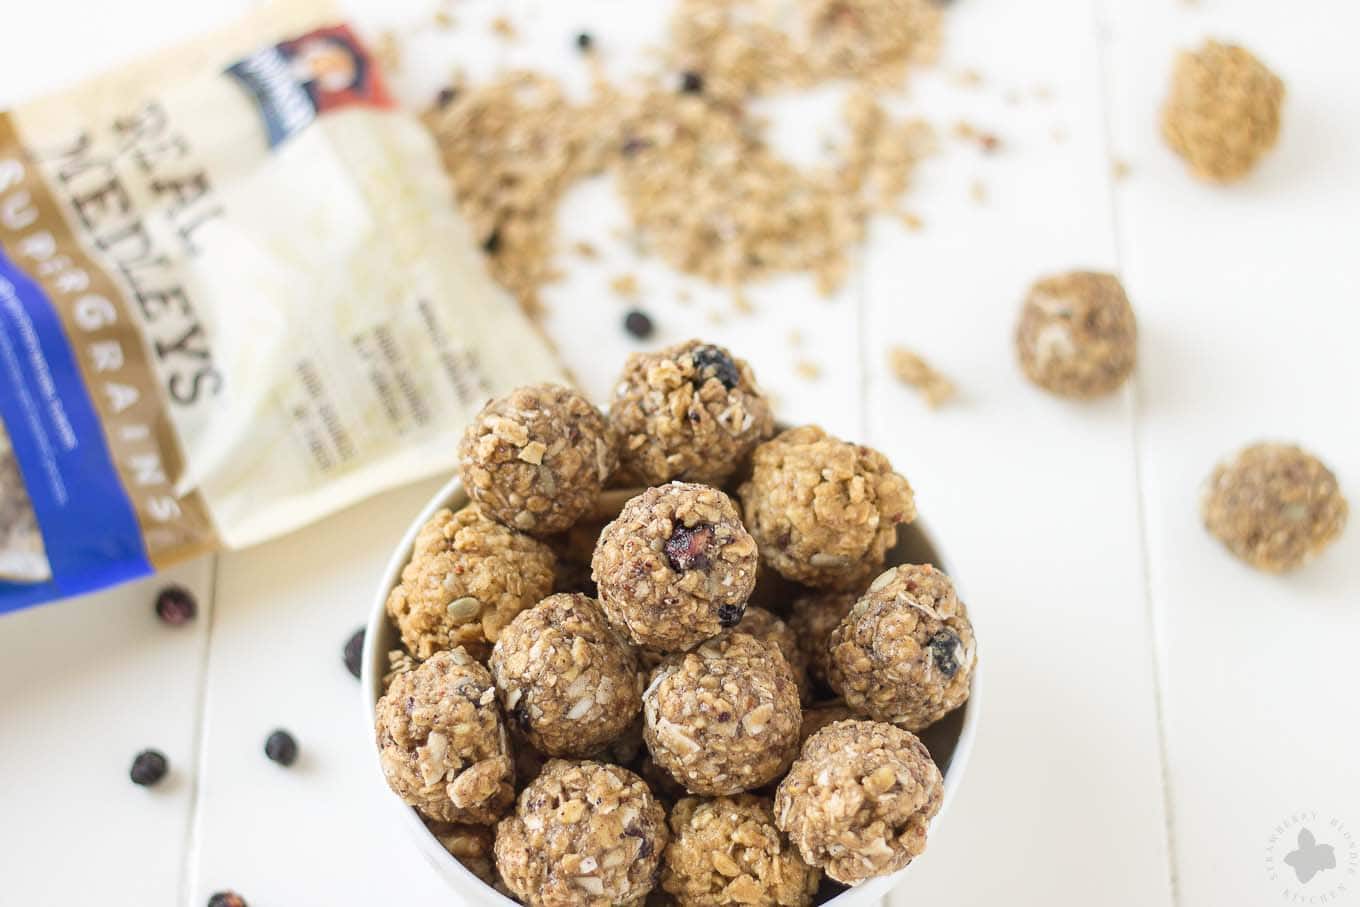 These 4 ingredient, no bake, Blueberry Muffin Energy Bites are the perfect grab and go breakfast or snack. Packed with good for you super grains and seeds, these will be your new and nutritious way to start your day or tackle your afternoon to do list! | Strawberry Blondie Kitchen